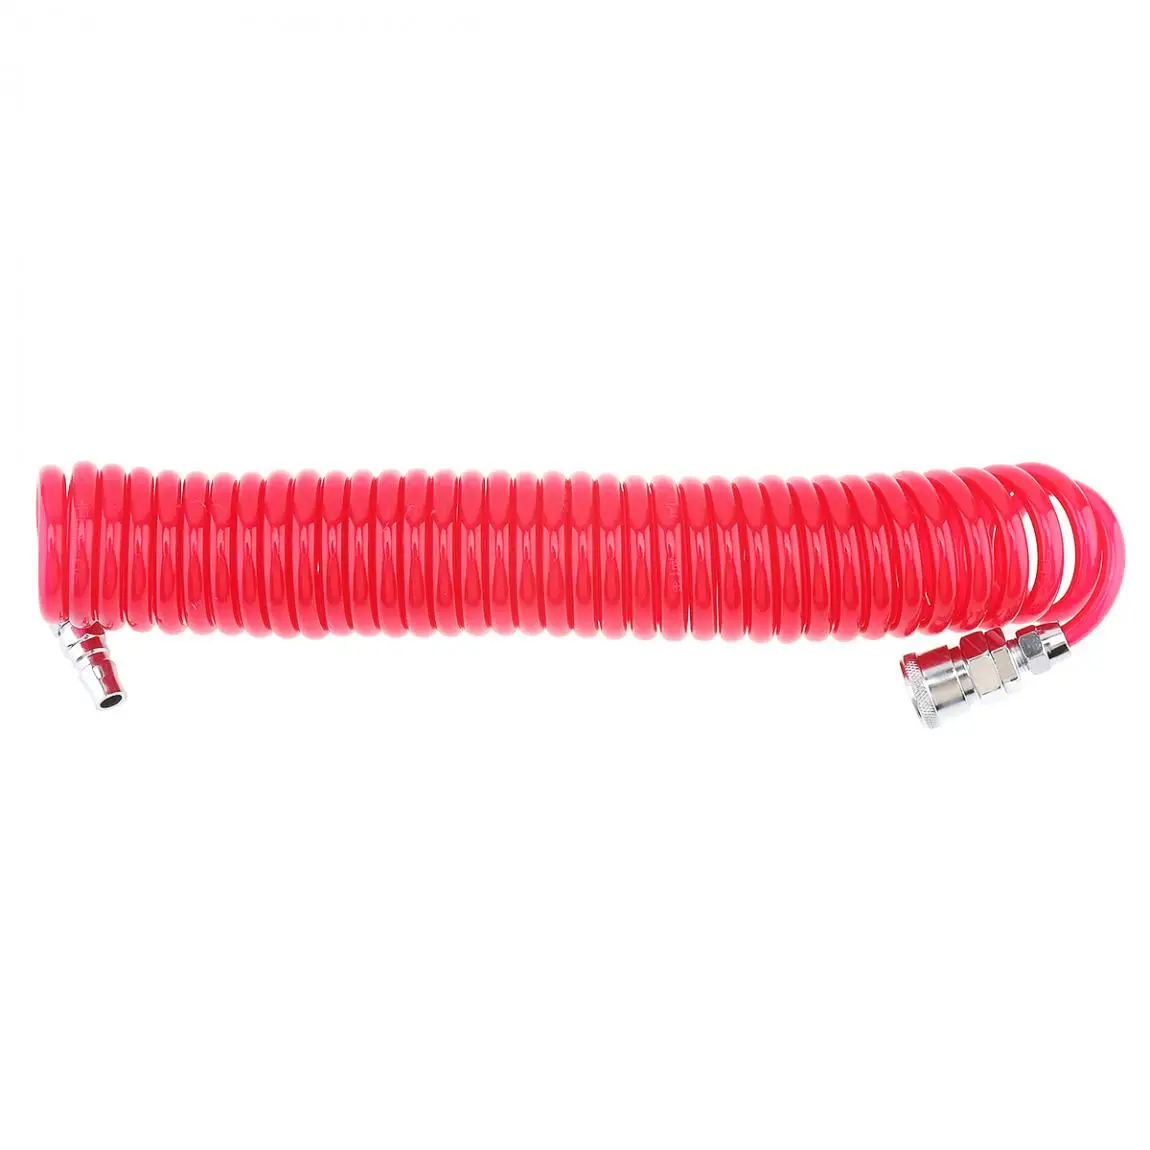 

6M 5 x 8mm Flexible PU Telescopic Hose Spring Tube with Fast Interface and Bayonet Quick Connector for Compressor Air Tool